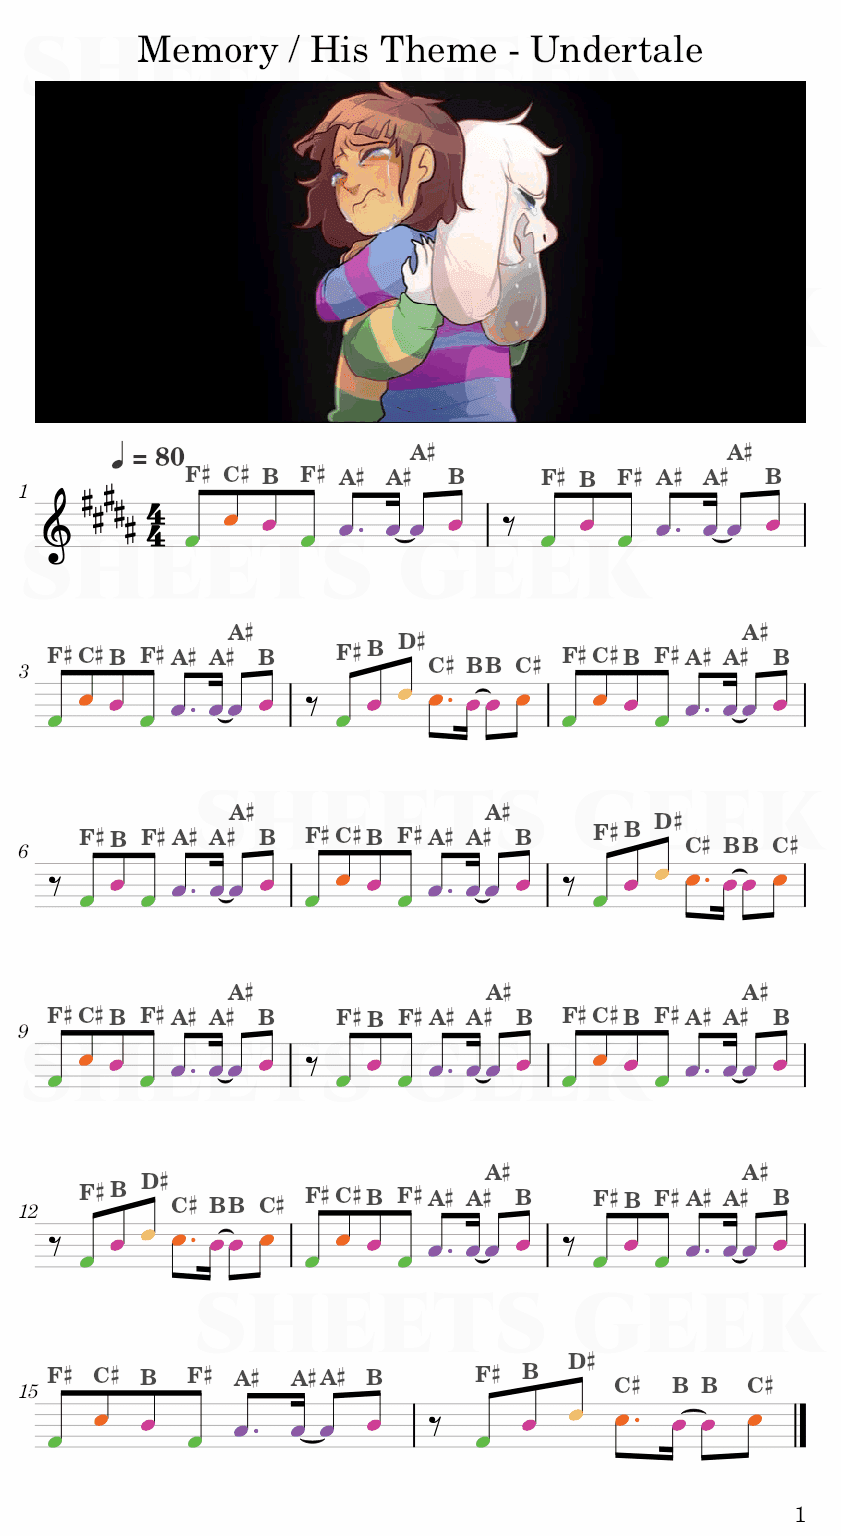 Memory / His Theme - Undertale Easy Sheet Music Free for piano, keyboard, flute, violin, sax, cello page 1